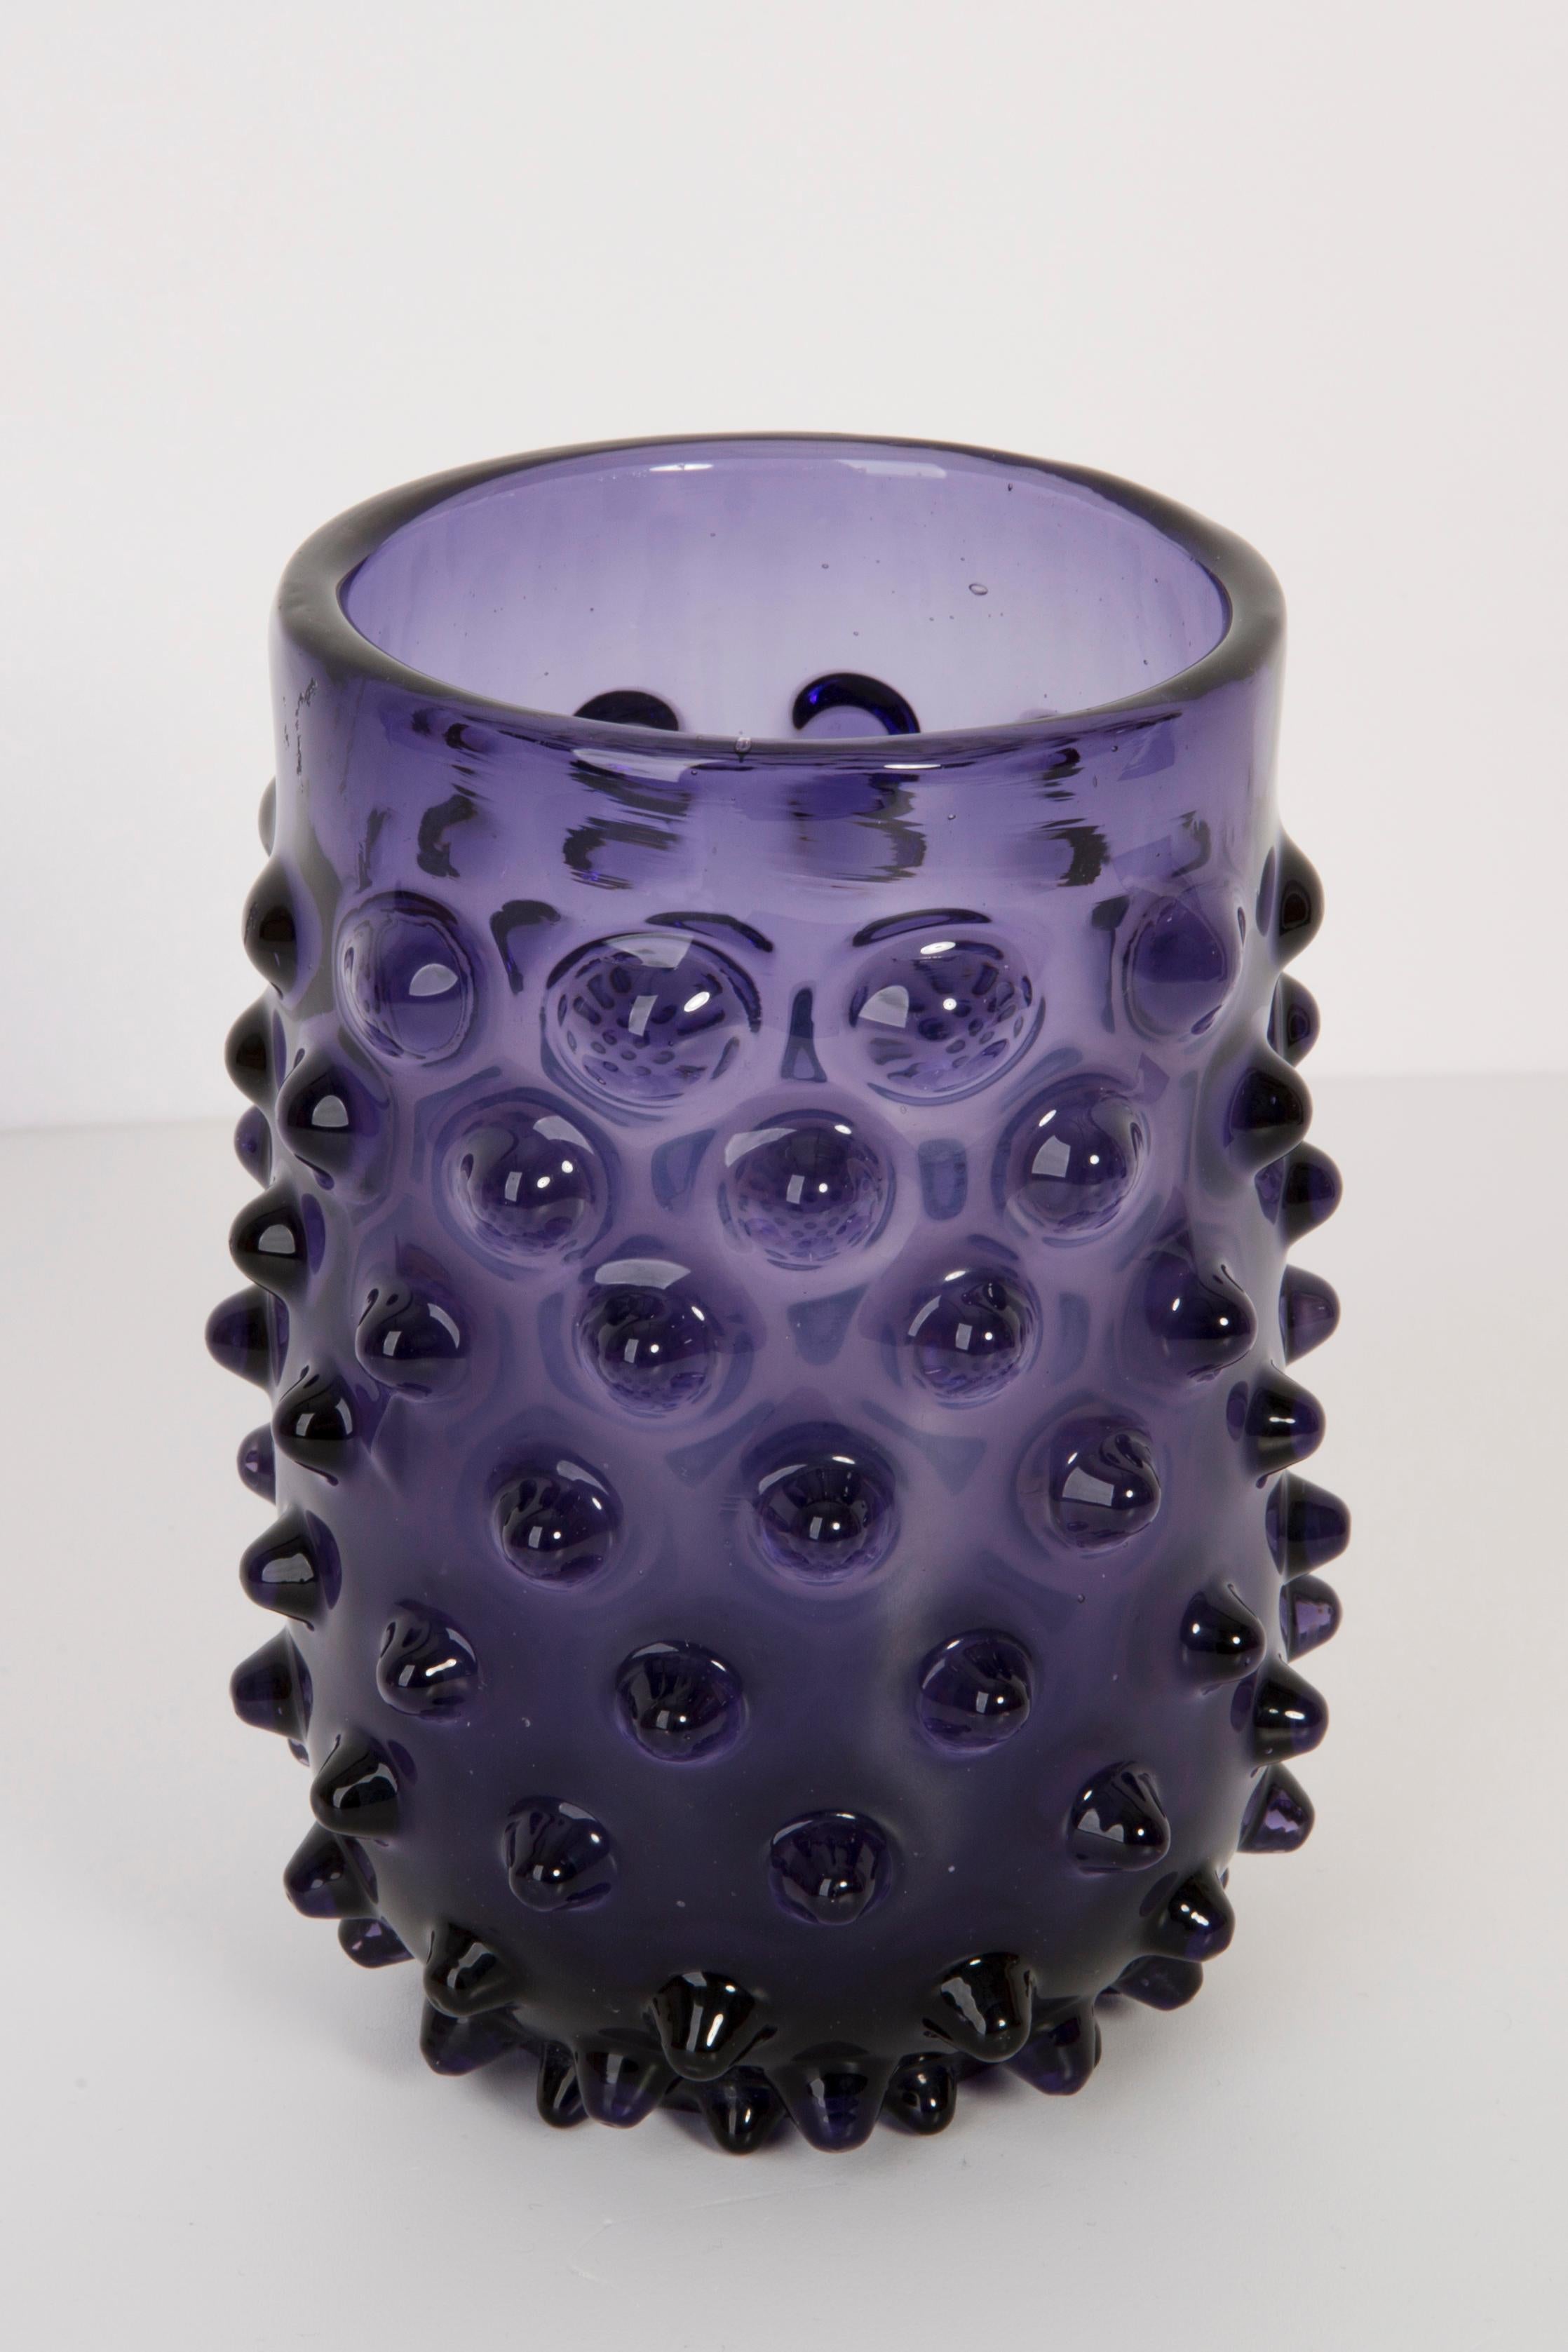 A stunning purple small vase with geometric design, made by one of the many glass manufacturers based in the region of Empoli, Italy. Has 